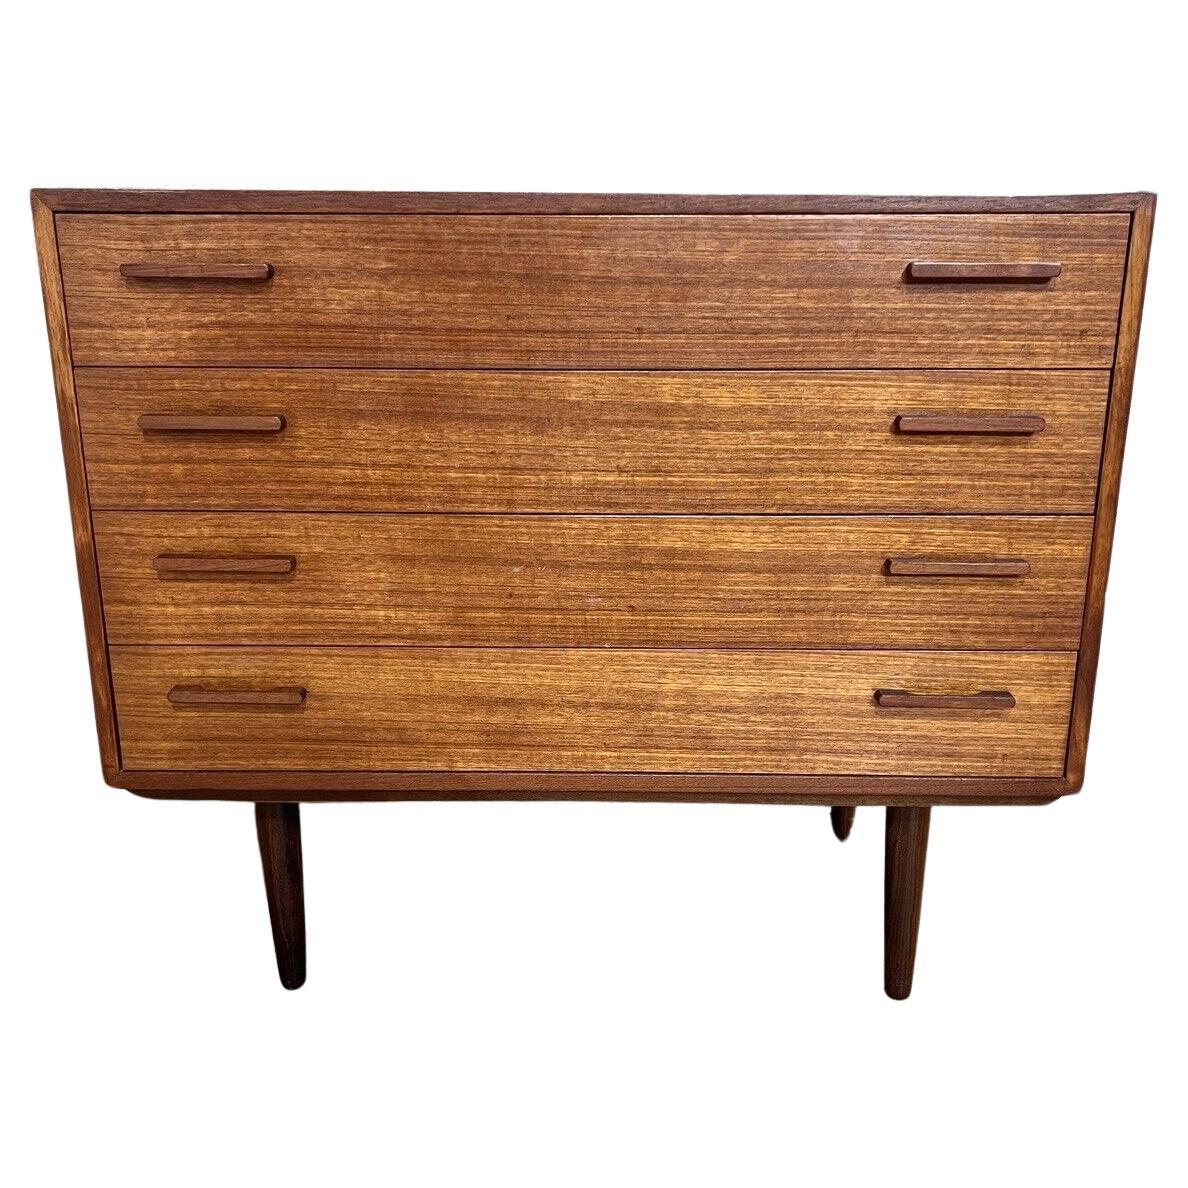 Mid Century Chest Drawers Teak Danish Vintage Furniture by Kia Kristiansen
Features four drawers so ample storage
Circa 1960s on this clean piece of vintage furniture
Wonderful Mid Century Modern Danish chest of drawers
Hand crafted from teak